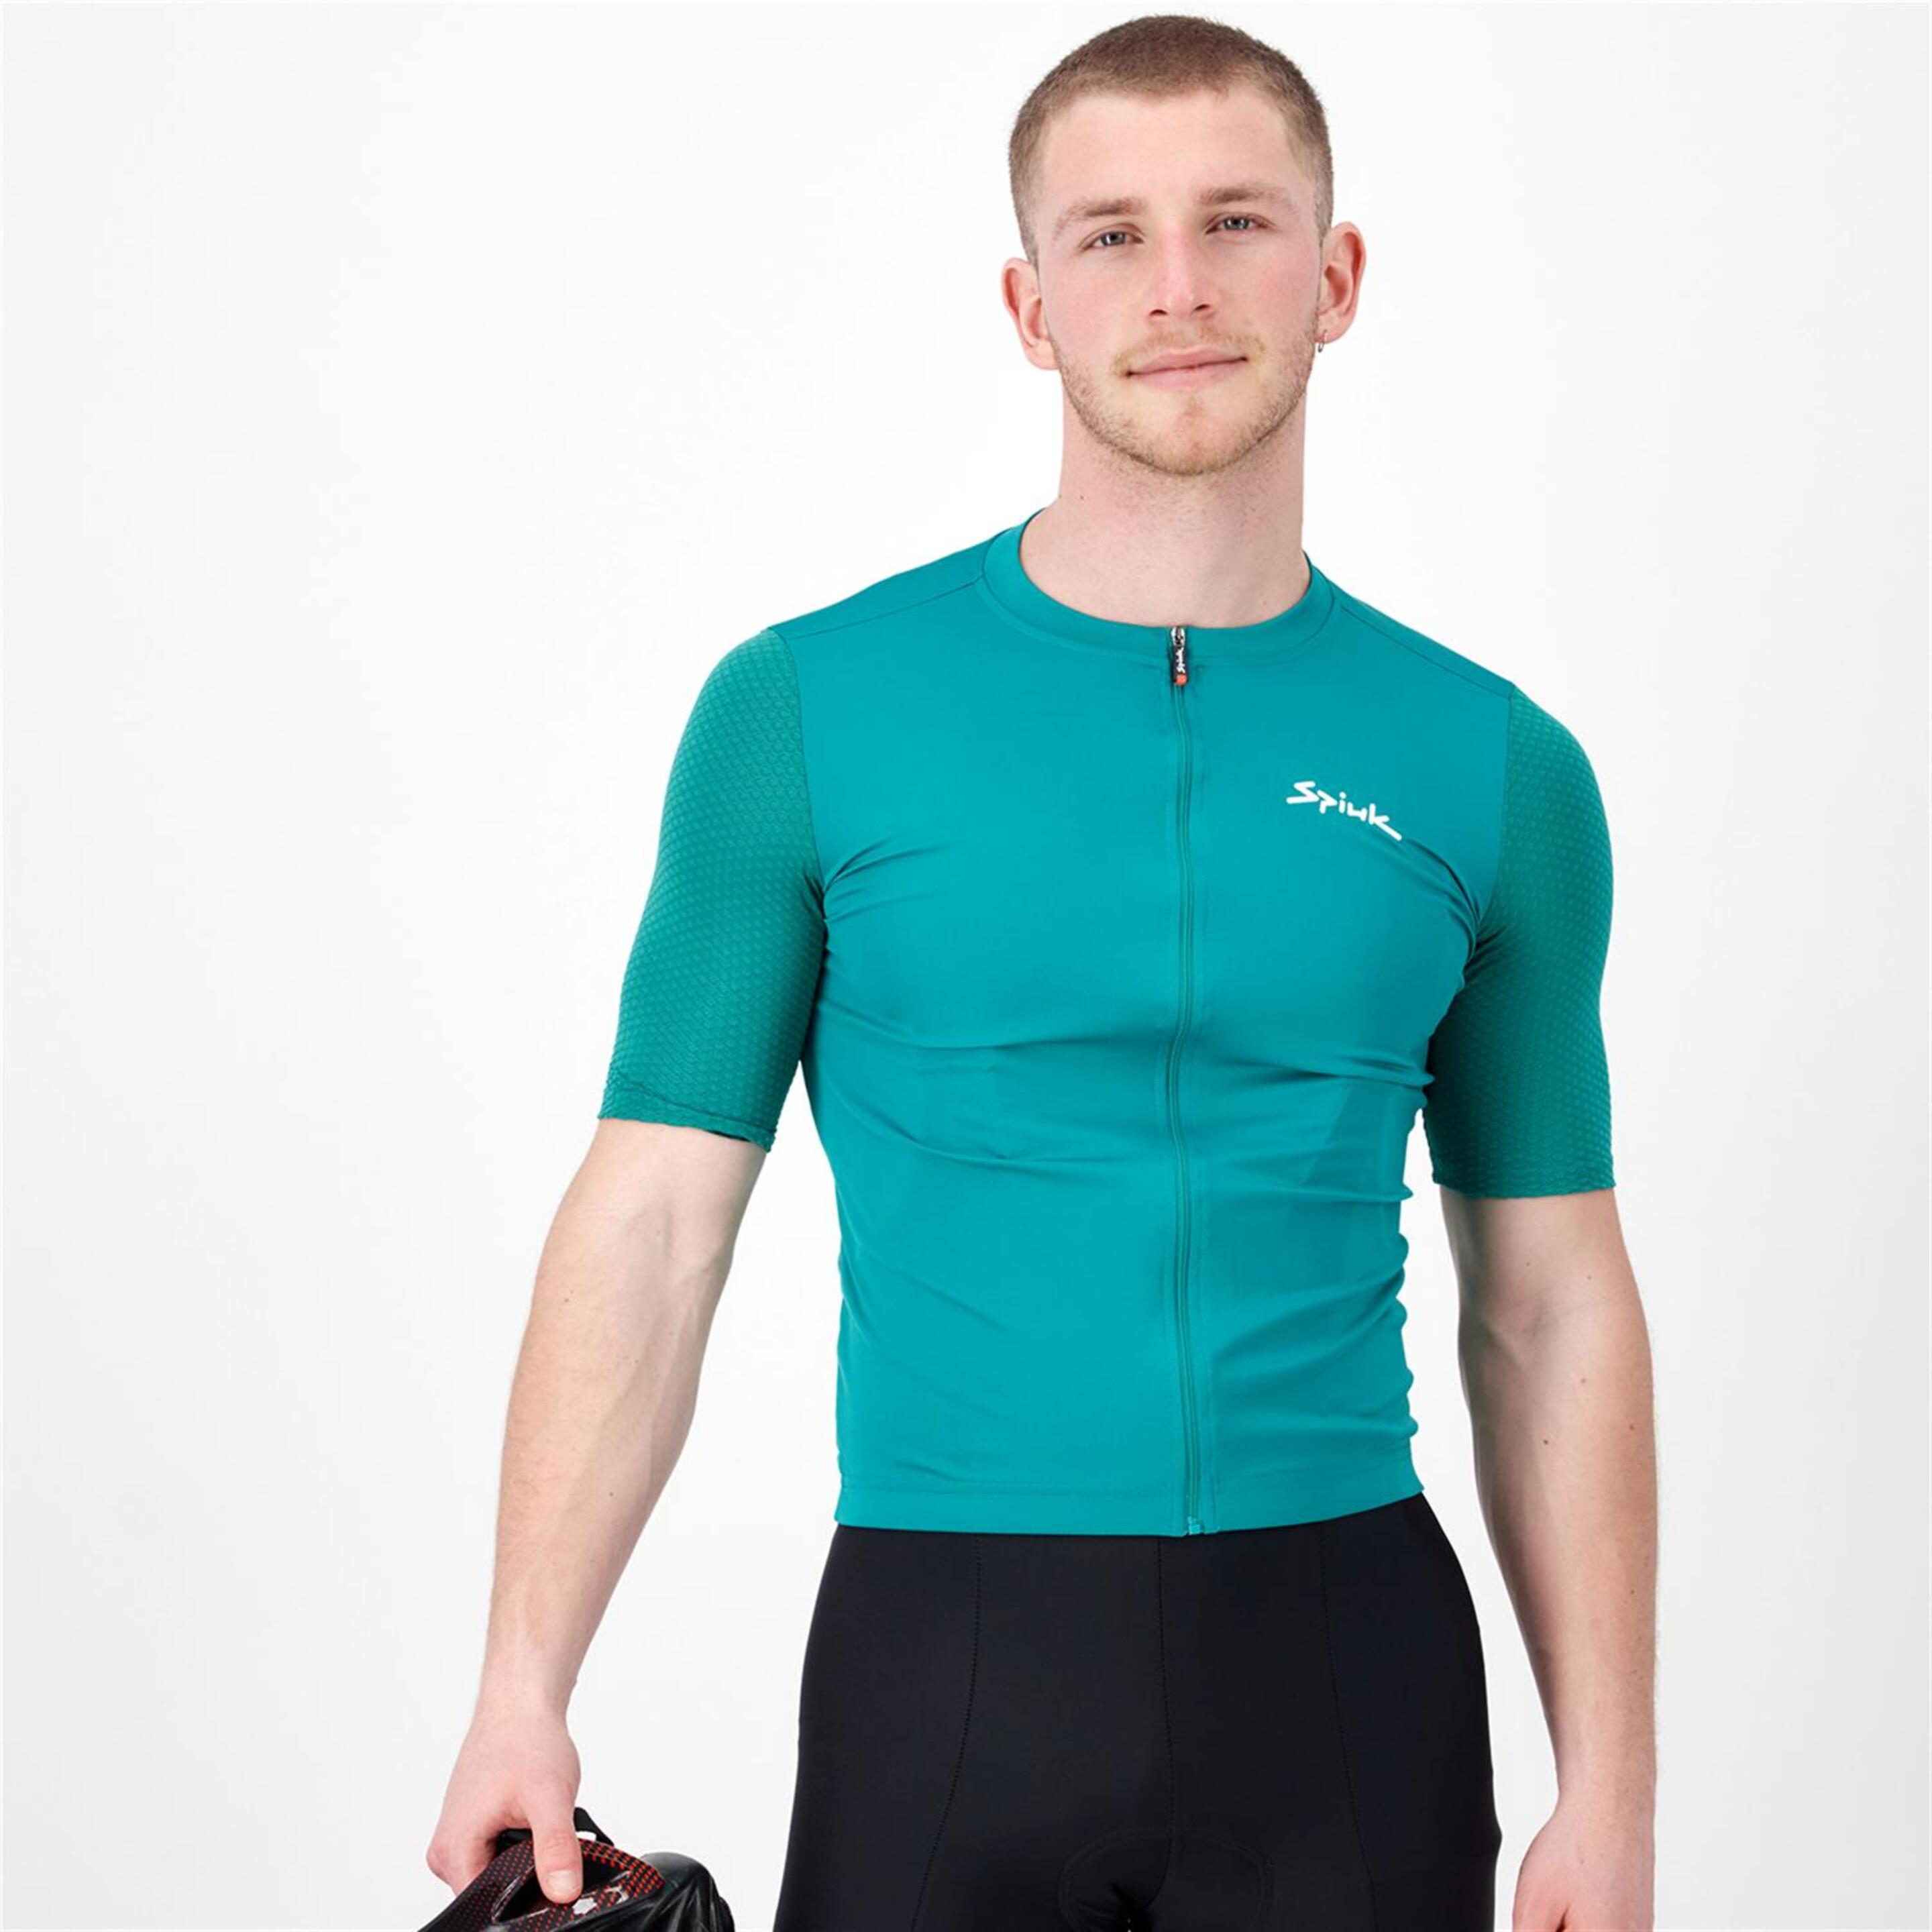 Spiuk Anatomic - verde - Maillot Ciclismo Hombre